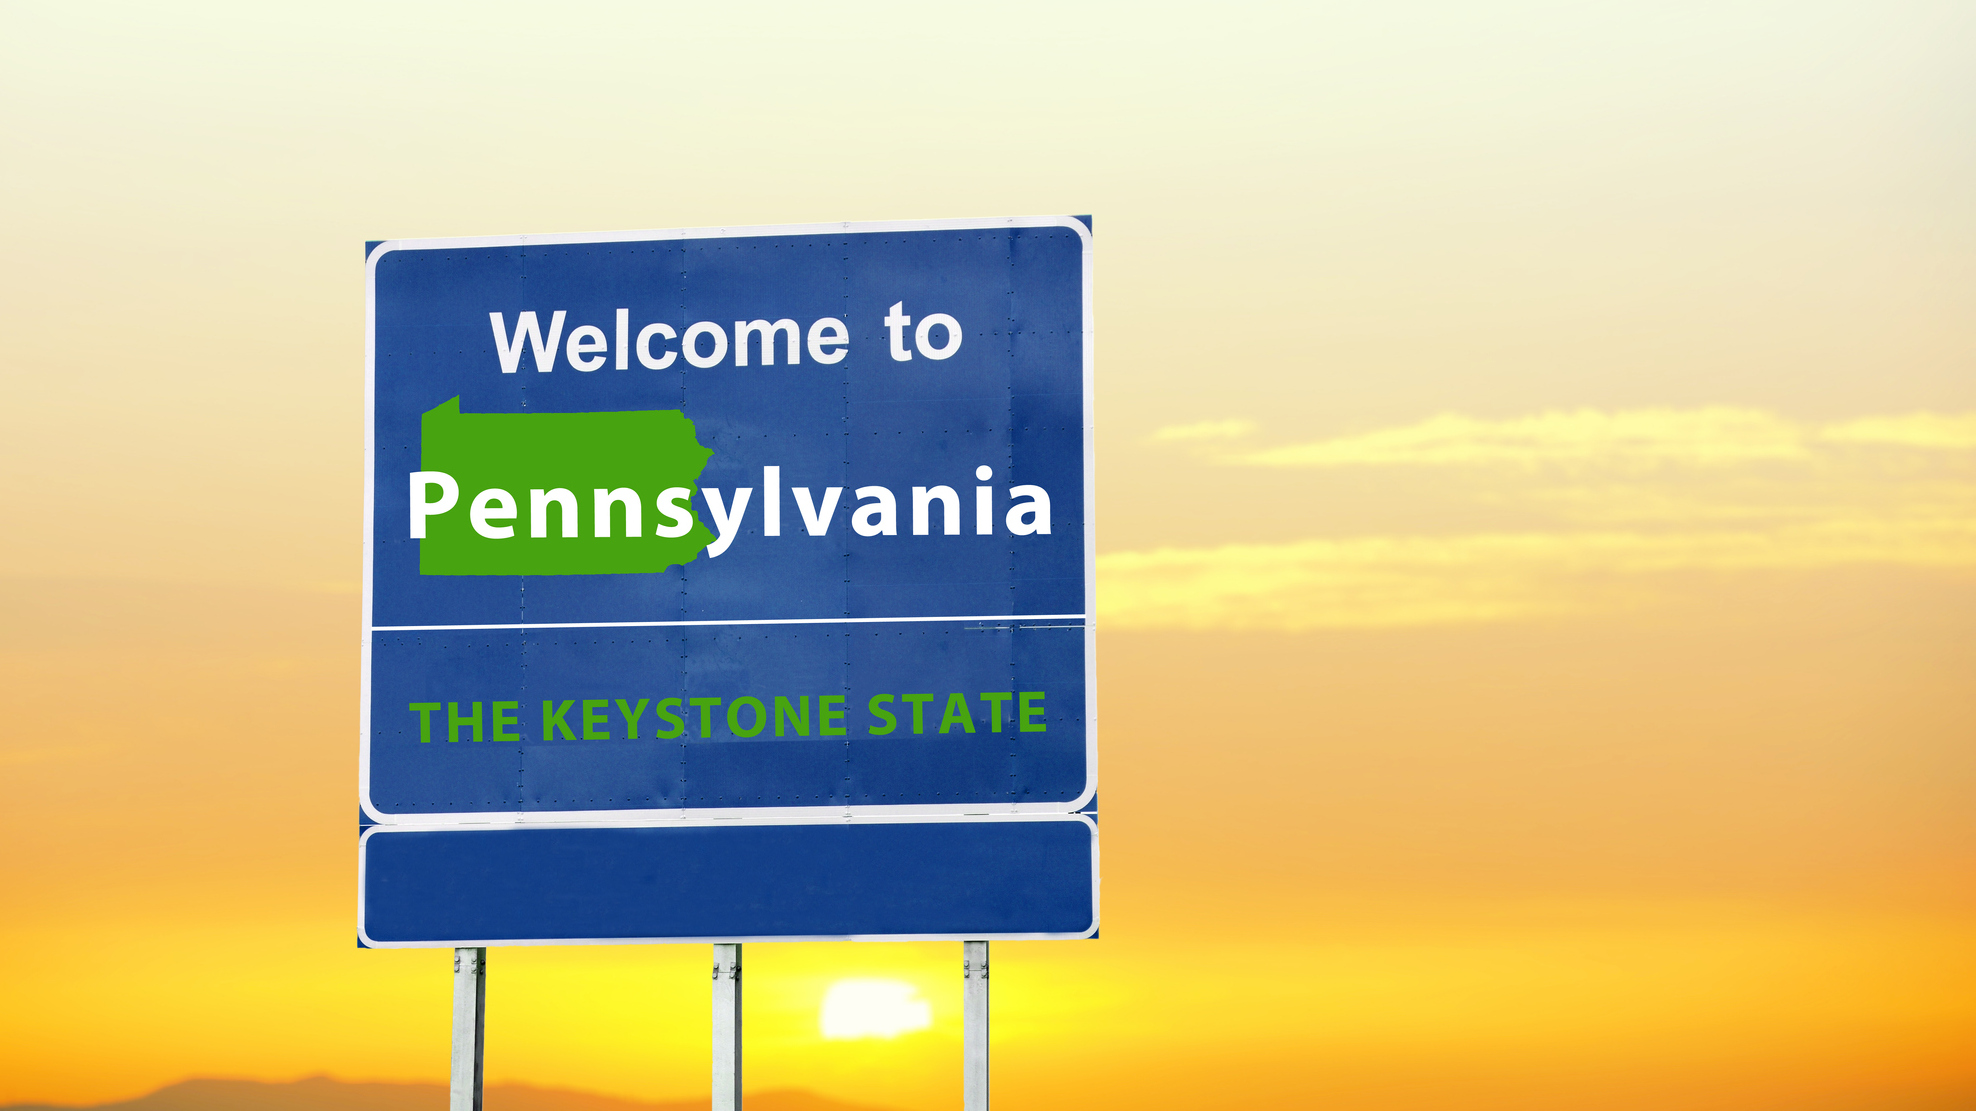 A "Welcome to Pennsylvania" road sign is seen against an orange sunset sky. the sign is blue and has a green outline of the state of pennsylvania. 